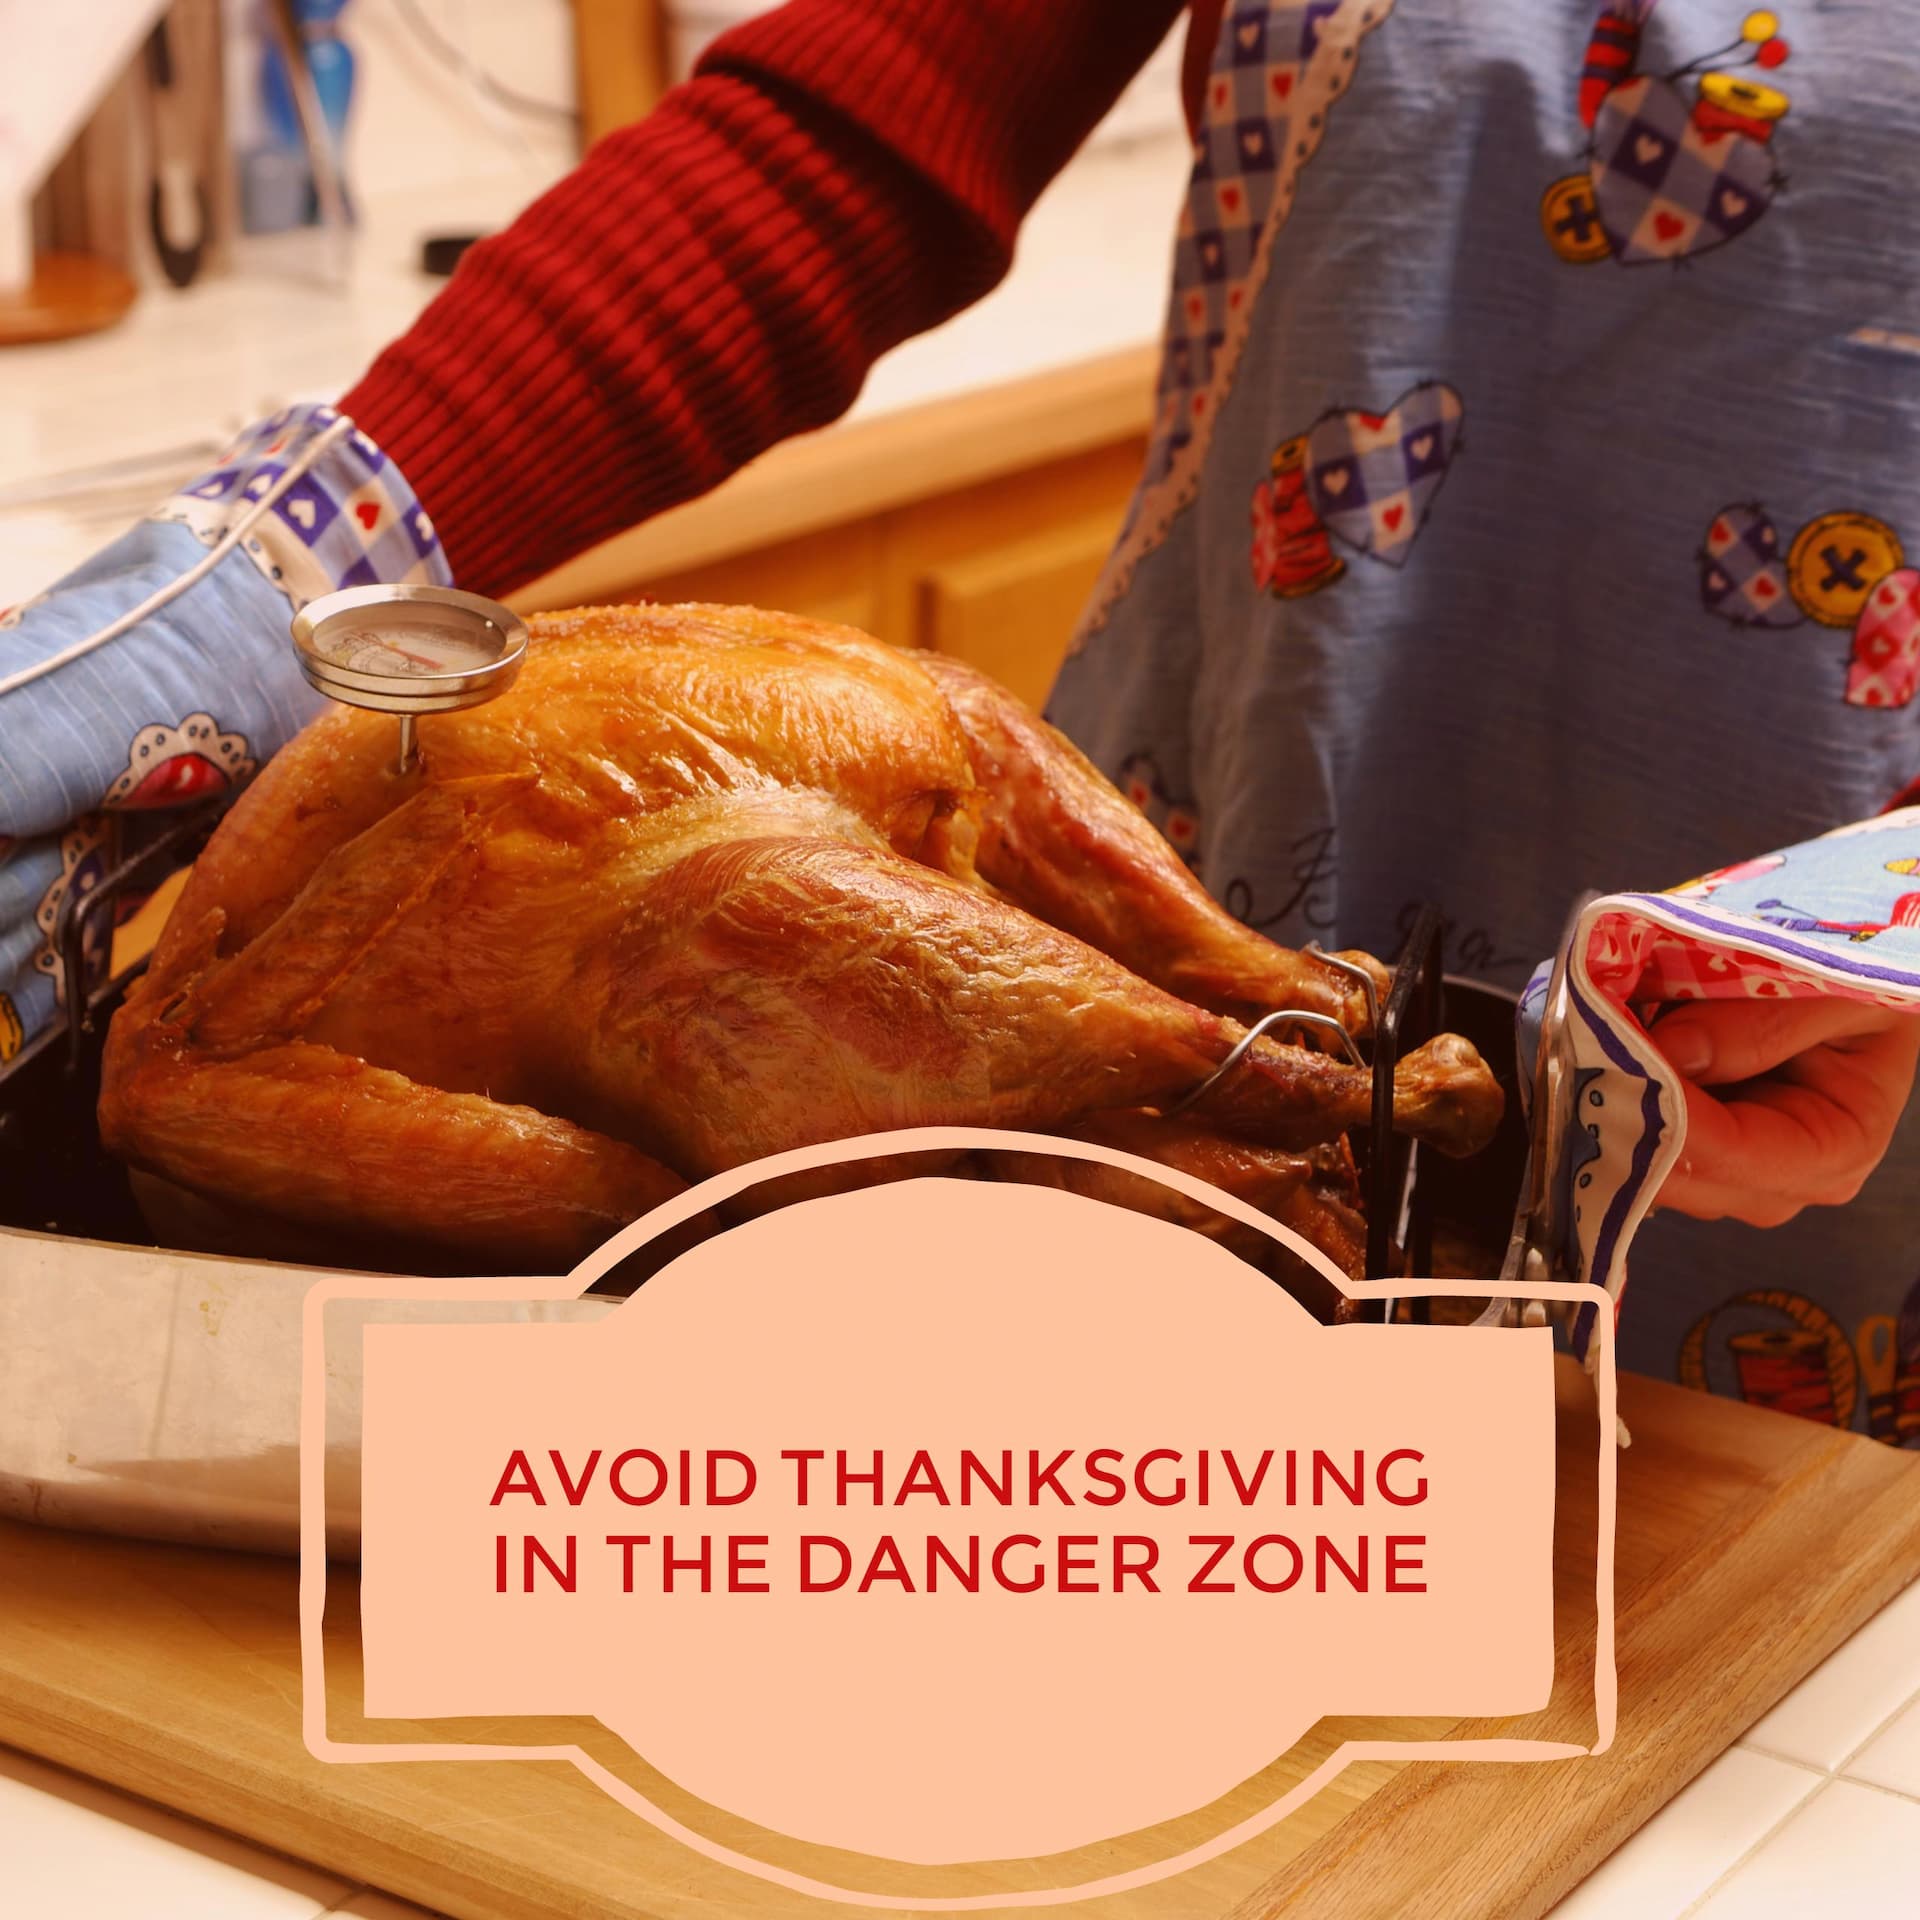 Avoid food poisoning and contamination this Thanksgiving with proper food handling and preparation tips.